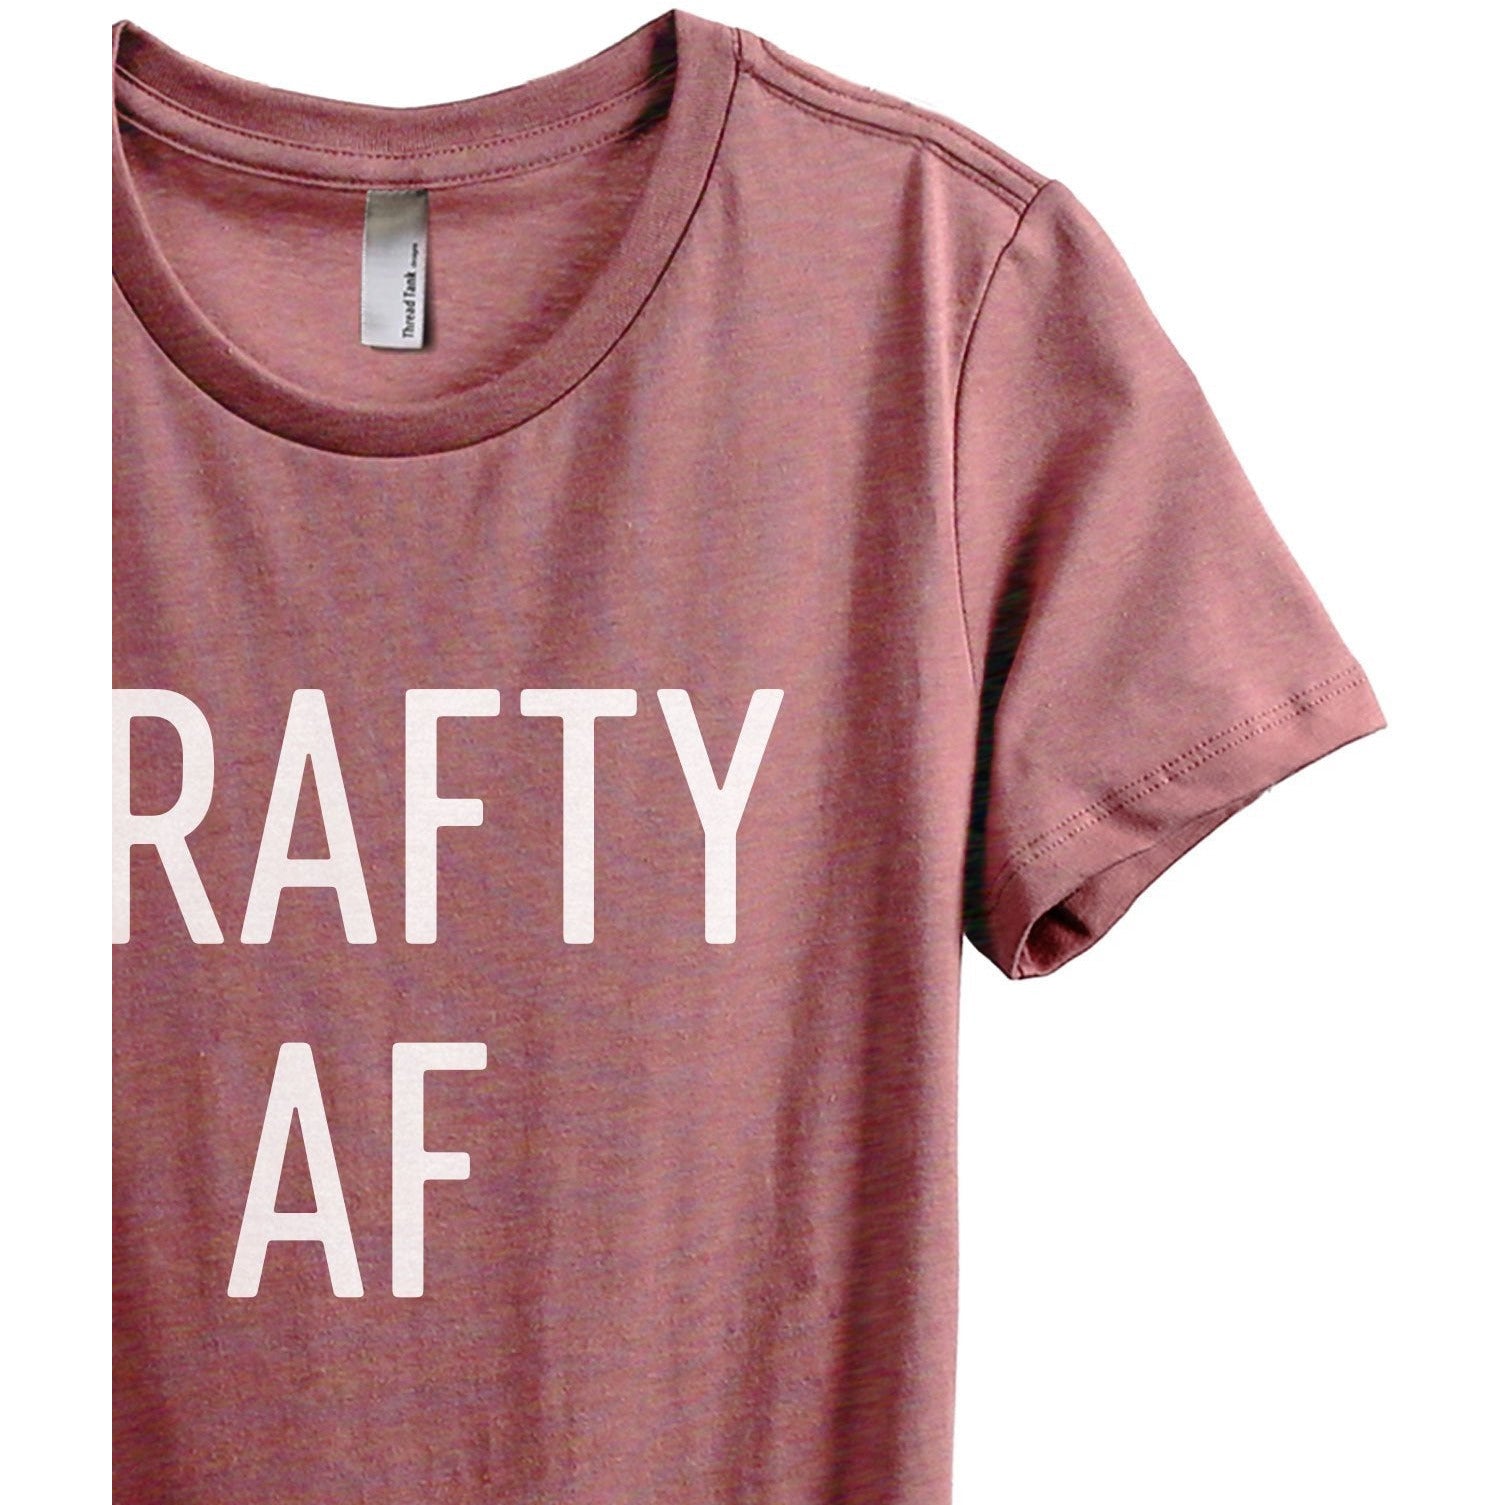 Crafty AF Women's Relaxed Crewneck T-Shirt Top Tee Heather Rouge